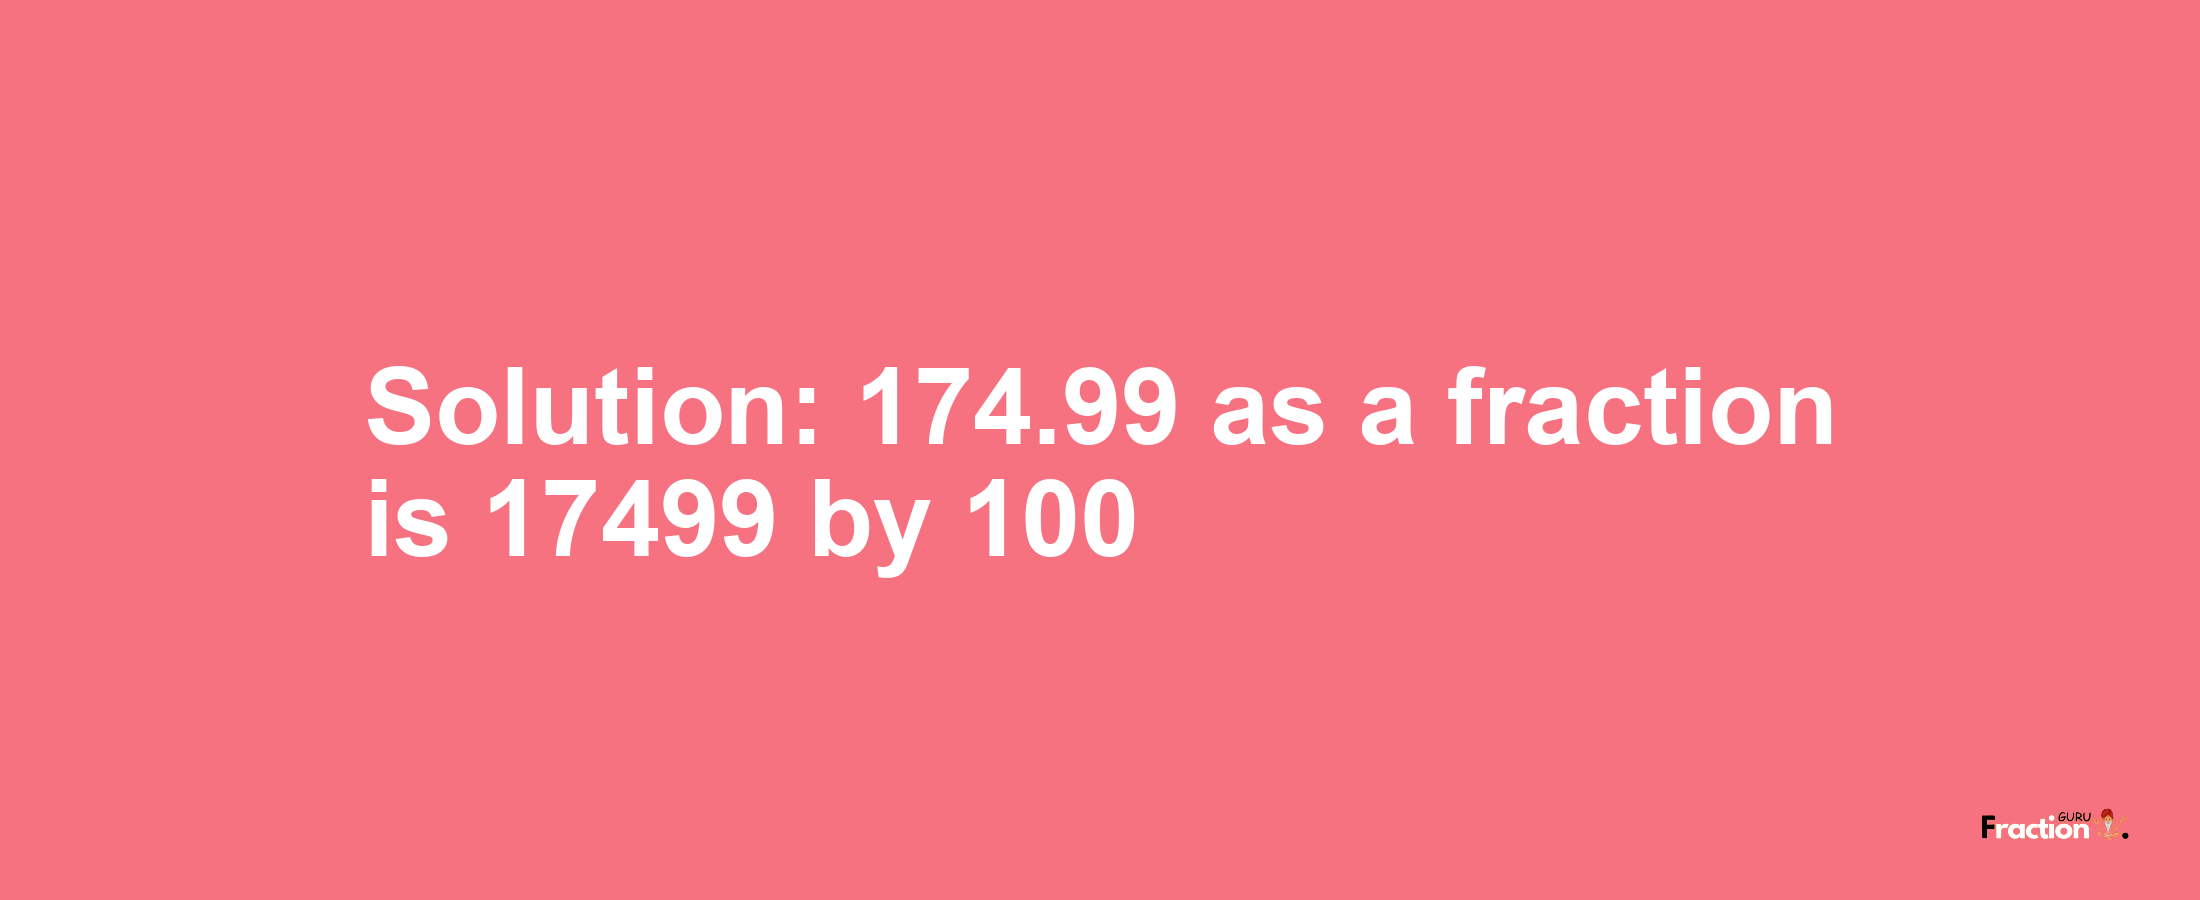 Solution:174.99 as a fraction is 17499/100